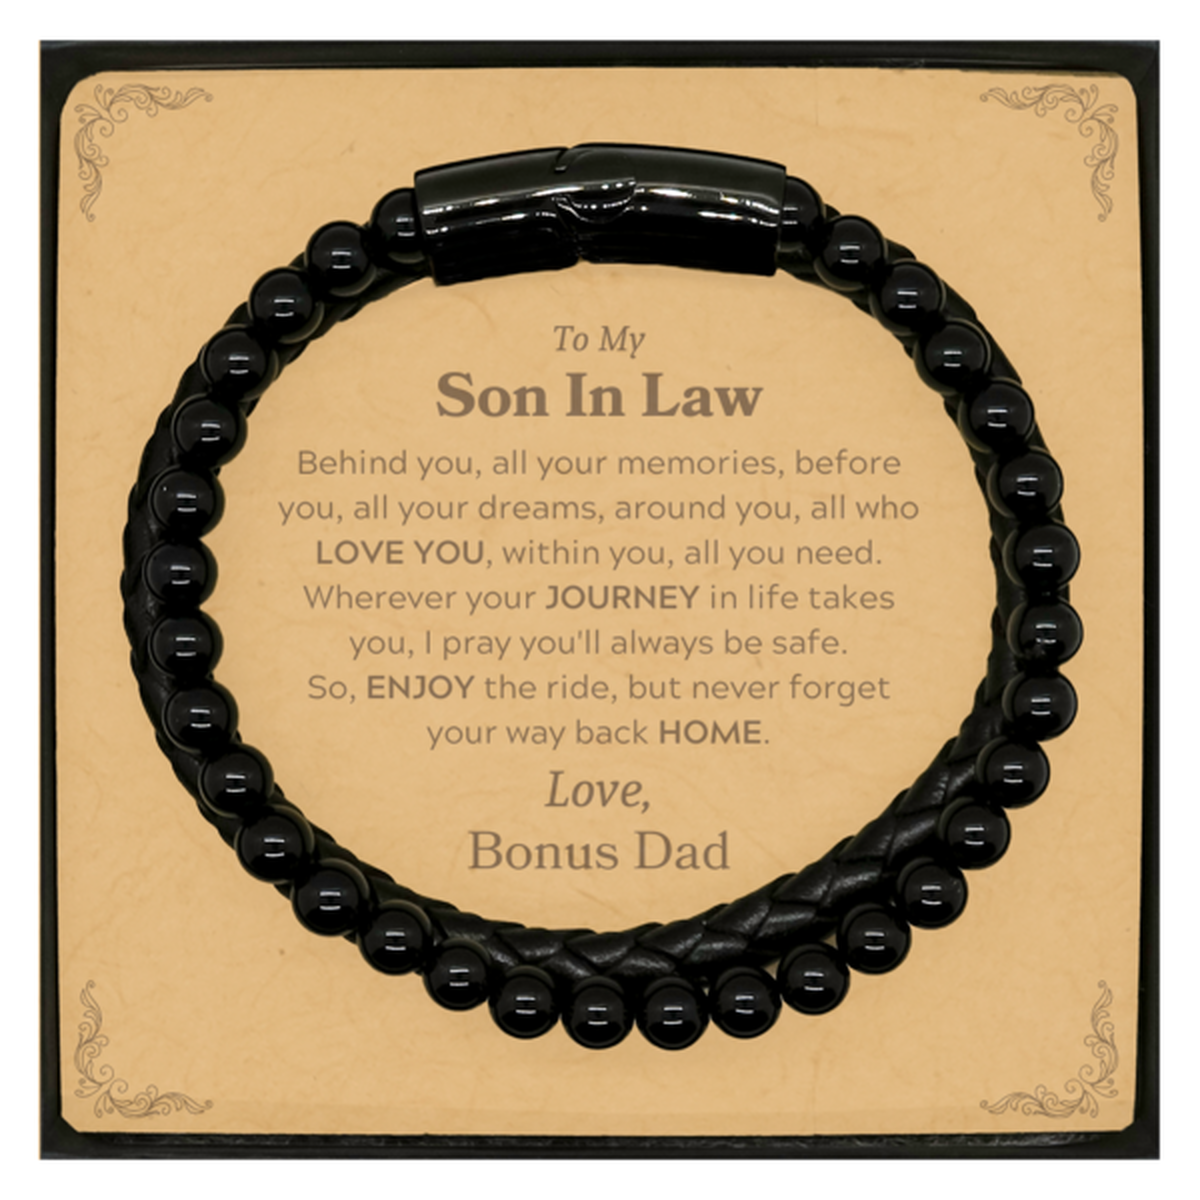 To My Son In Law Graduation Gifts from Bonus Dad, Son In Law Stone Leather Bracelets Christmas Birthday Gifts for Son In Law Behind you, all your memories, before you, all your dreams. Love, Bonus Dad